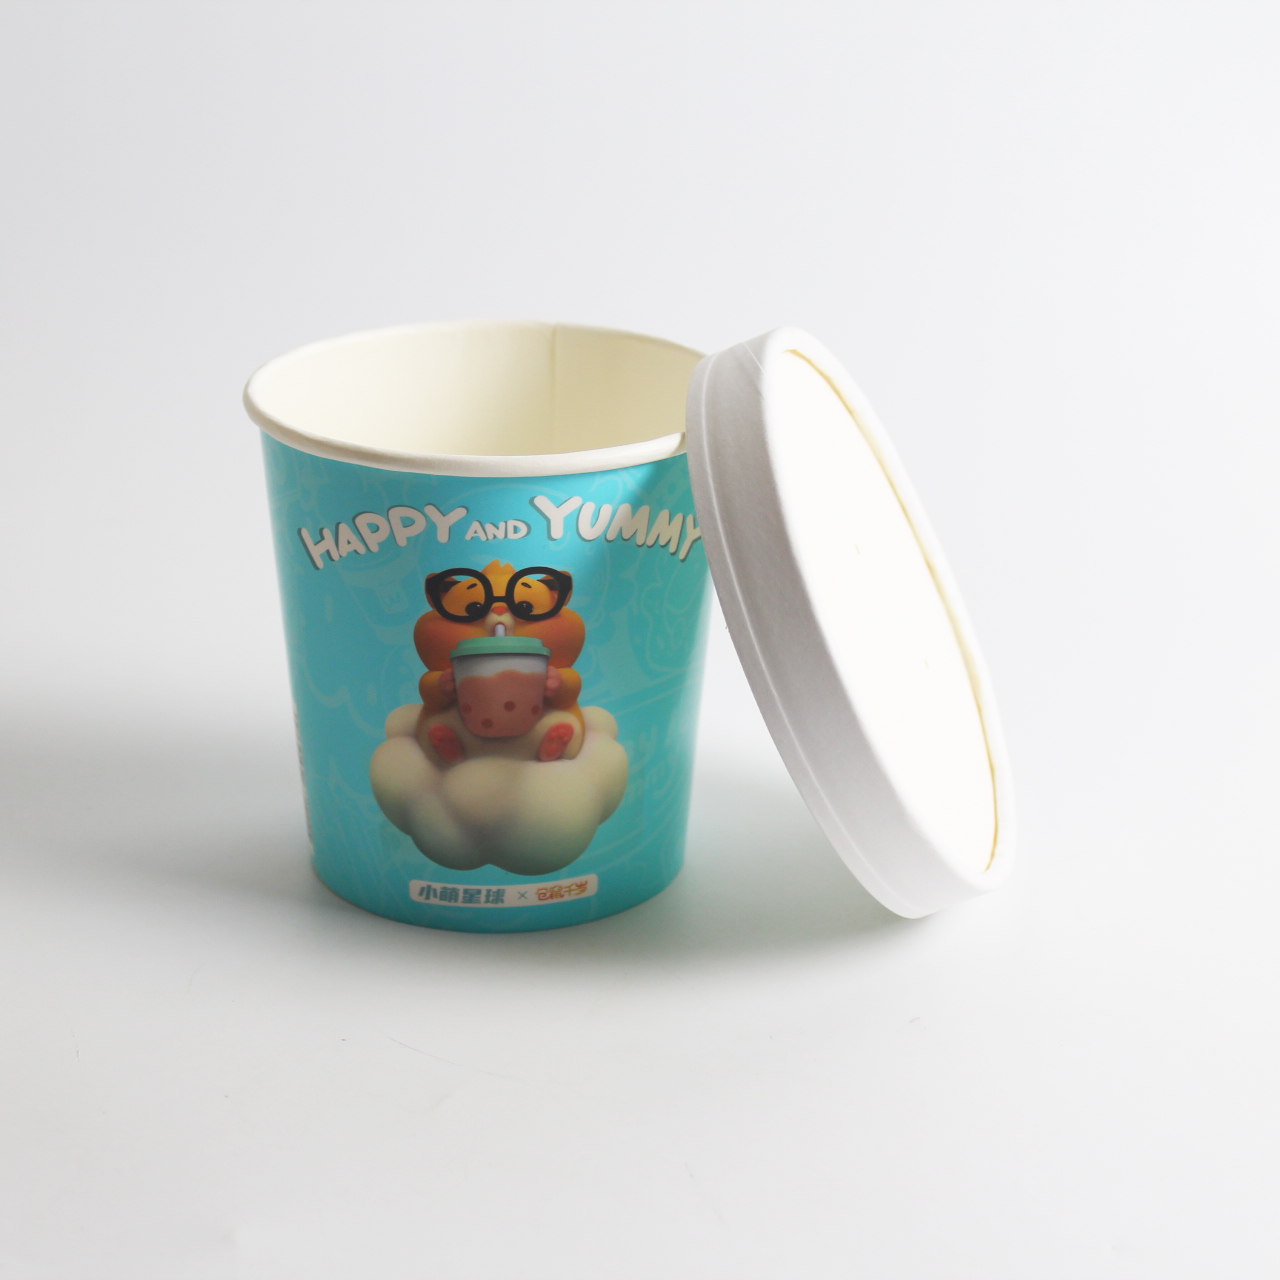 https://www.tuobopackaging.com/12oz-ice-cream-cups-custom-printed- cups-for-frozen-dessert-tuobo-product/